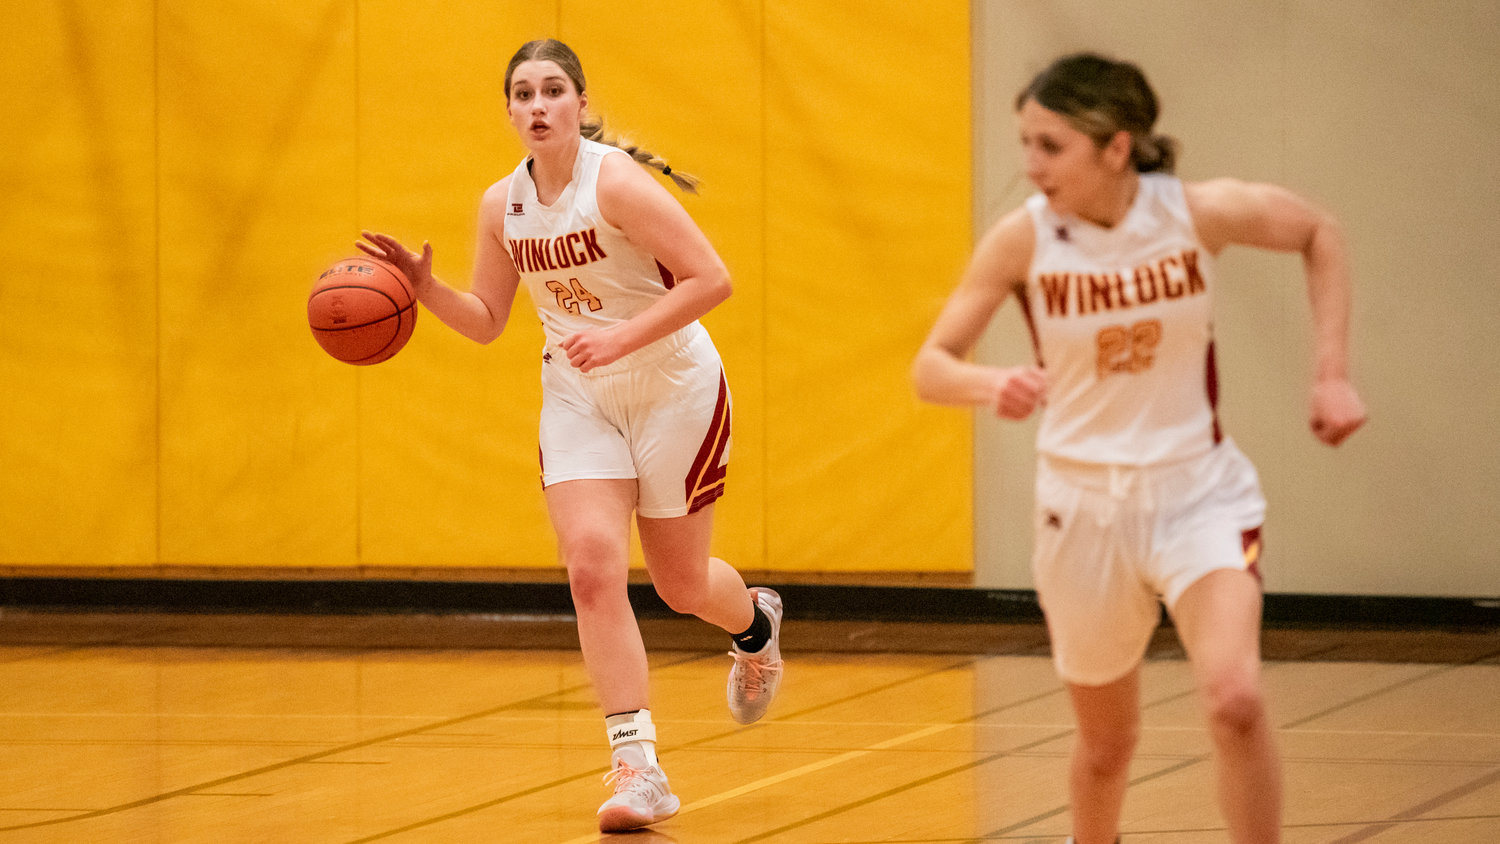 Winlock’s Addison Hall (24) brings the ball up court Thursday night during a game.